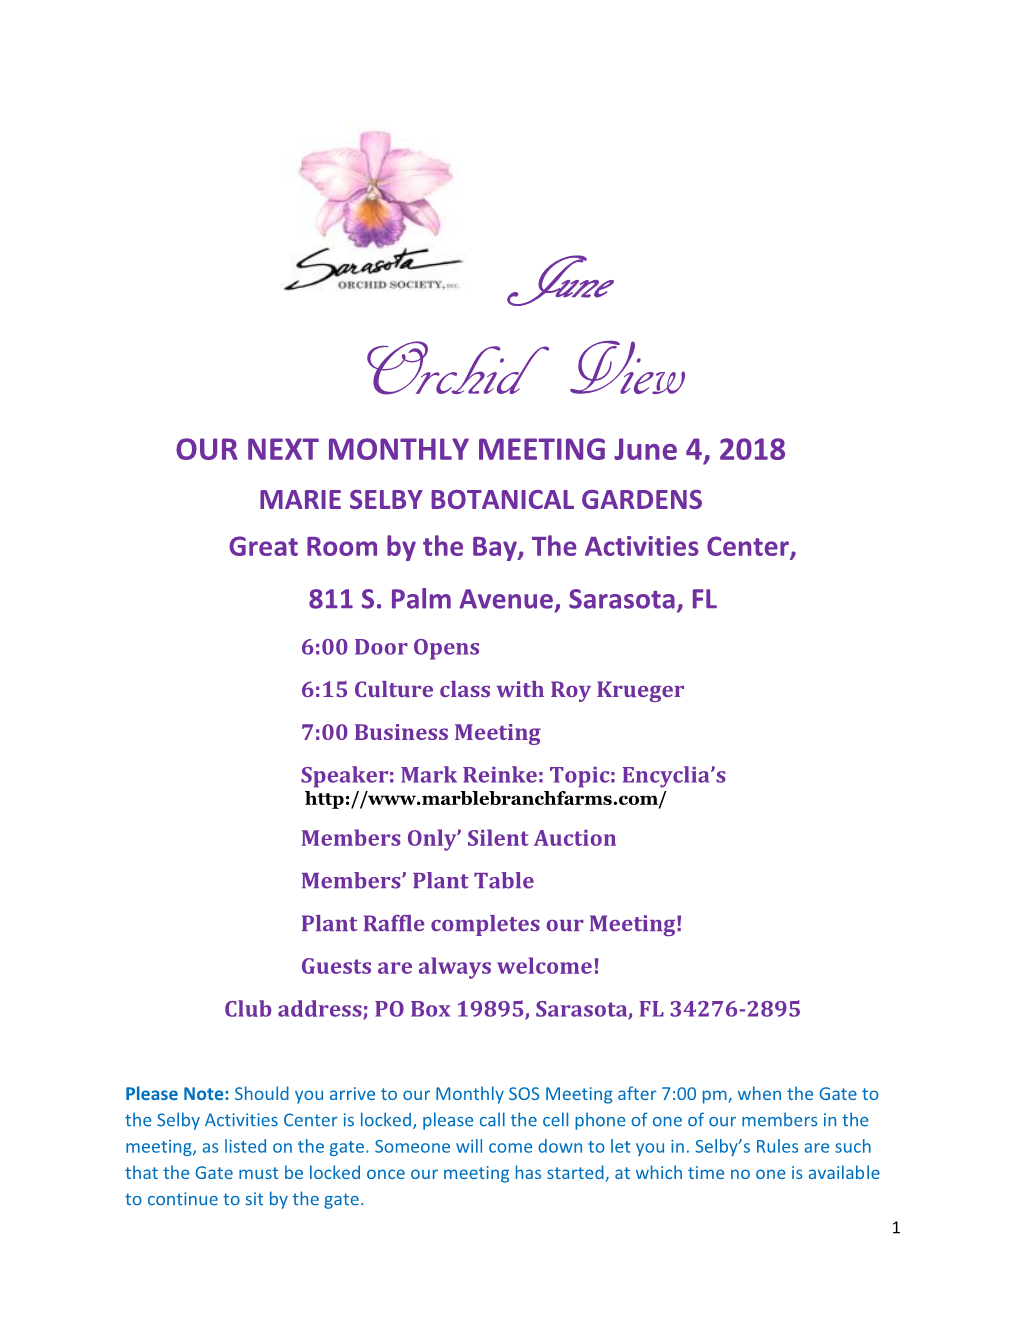 Orchid View OUR NEXT MONTHLY MEETING June 4, 2018 MARIE SELBY BOTANICAL GARDENS Great Room by the Bay, the Activities Center, 811 S